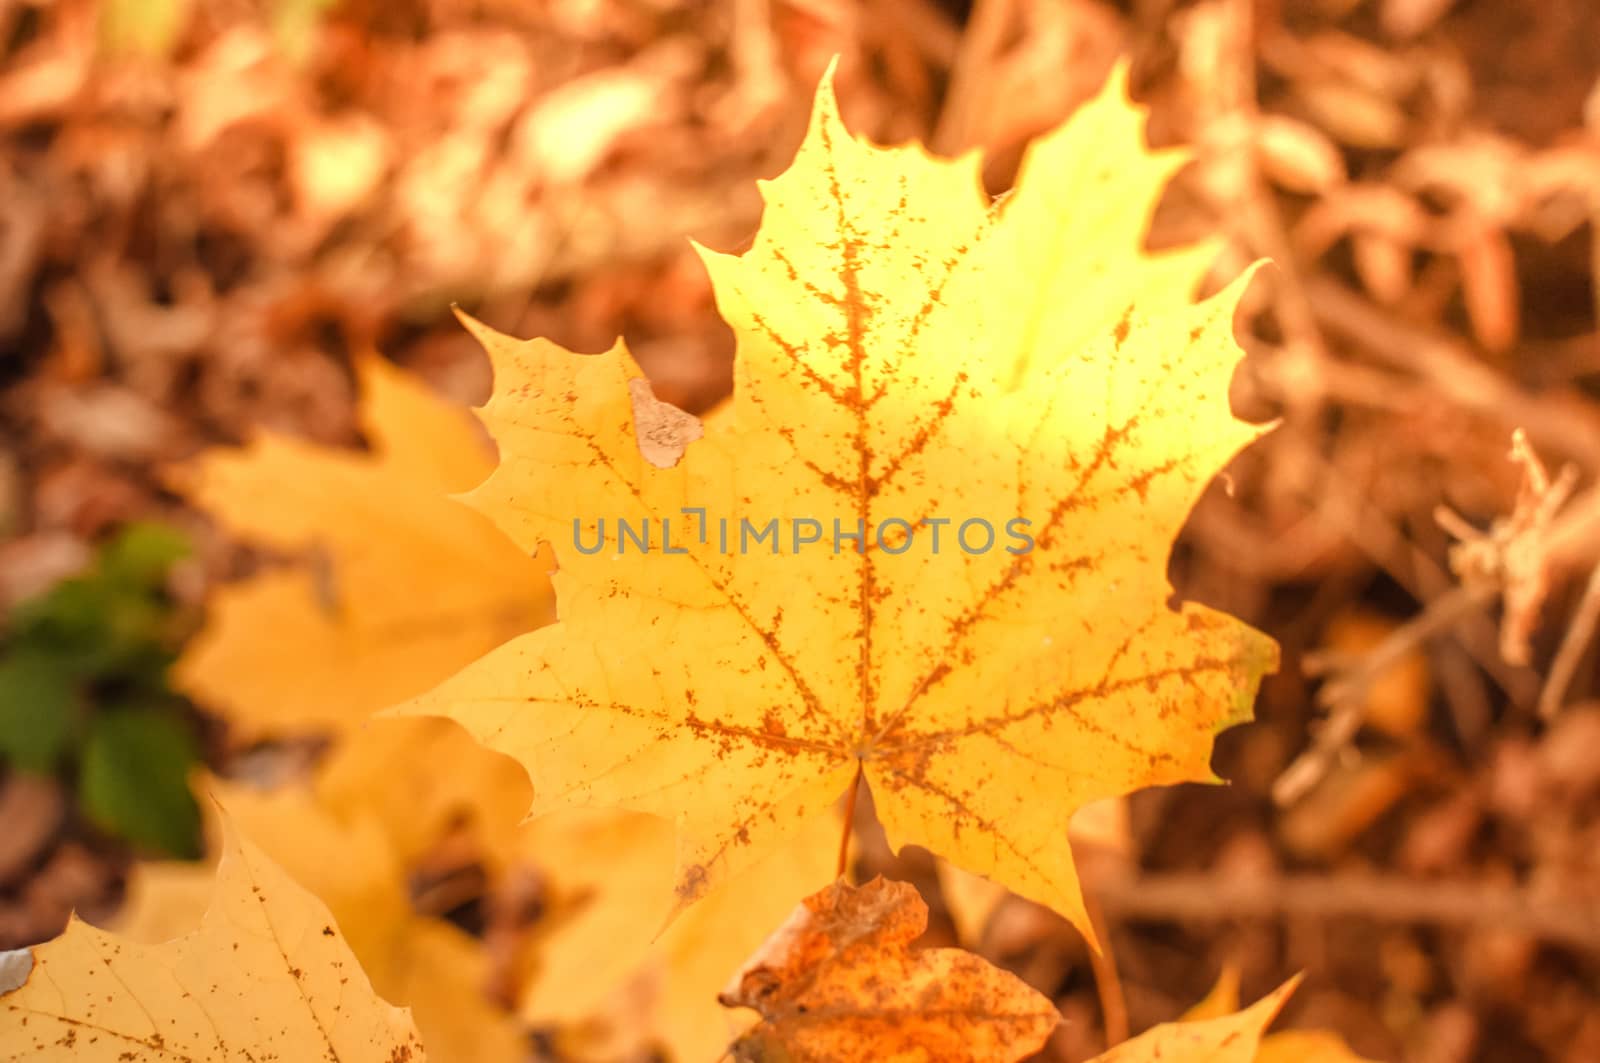 Against the background of orange and yellow fallen leaves